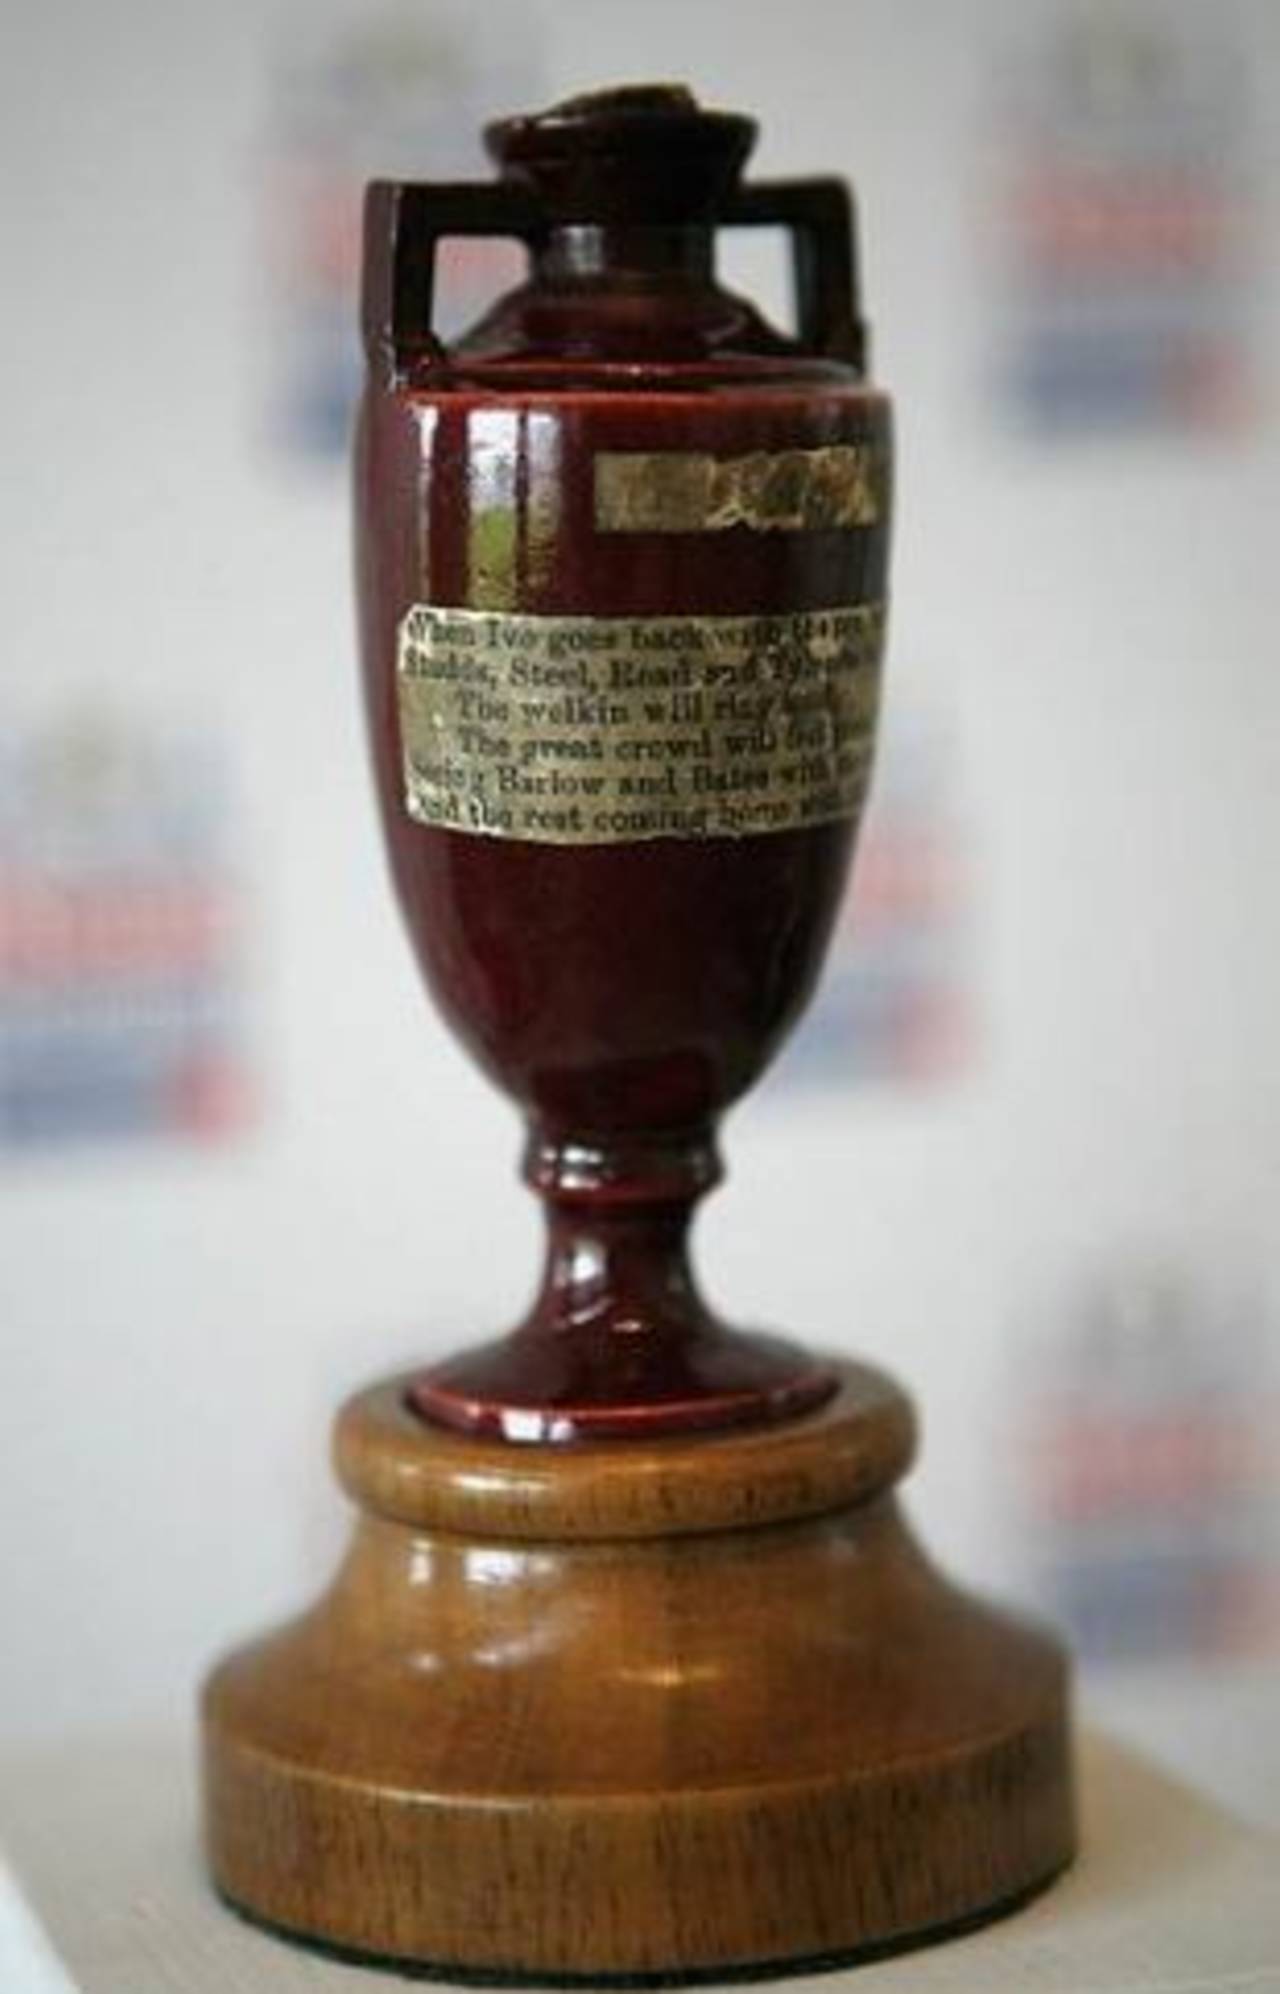 The urn, one of the world's most famous - and smallest - trophies&nbsp;&nbsp;&bull;&nbsp;&nbsp;Daniel Berehulak/Getty Images